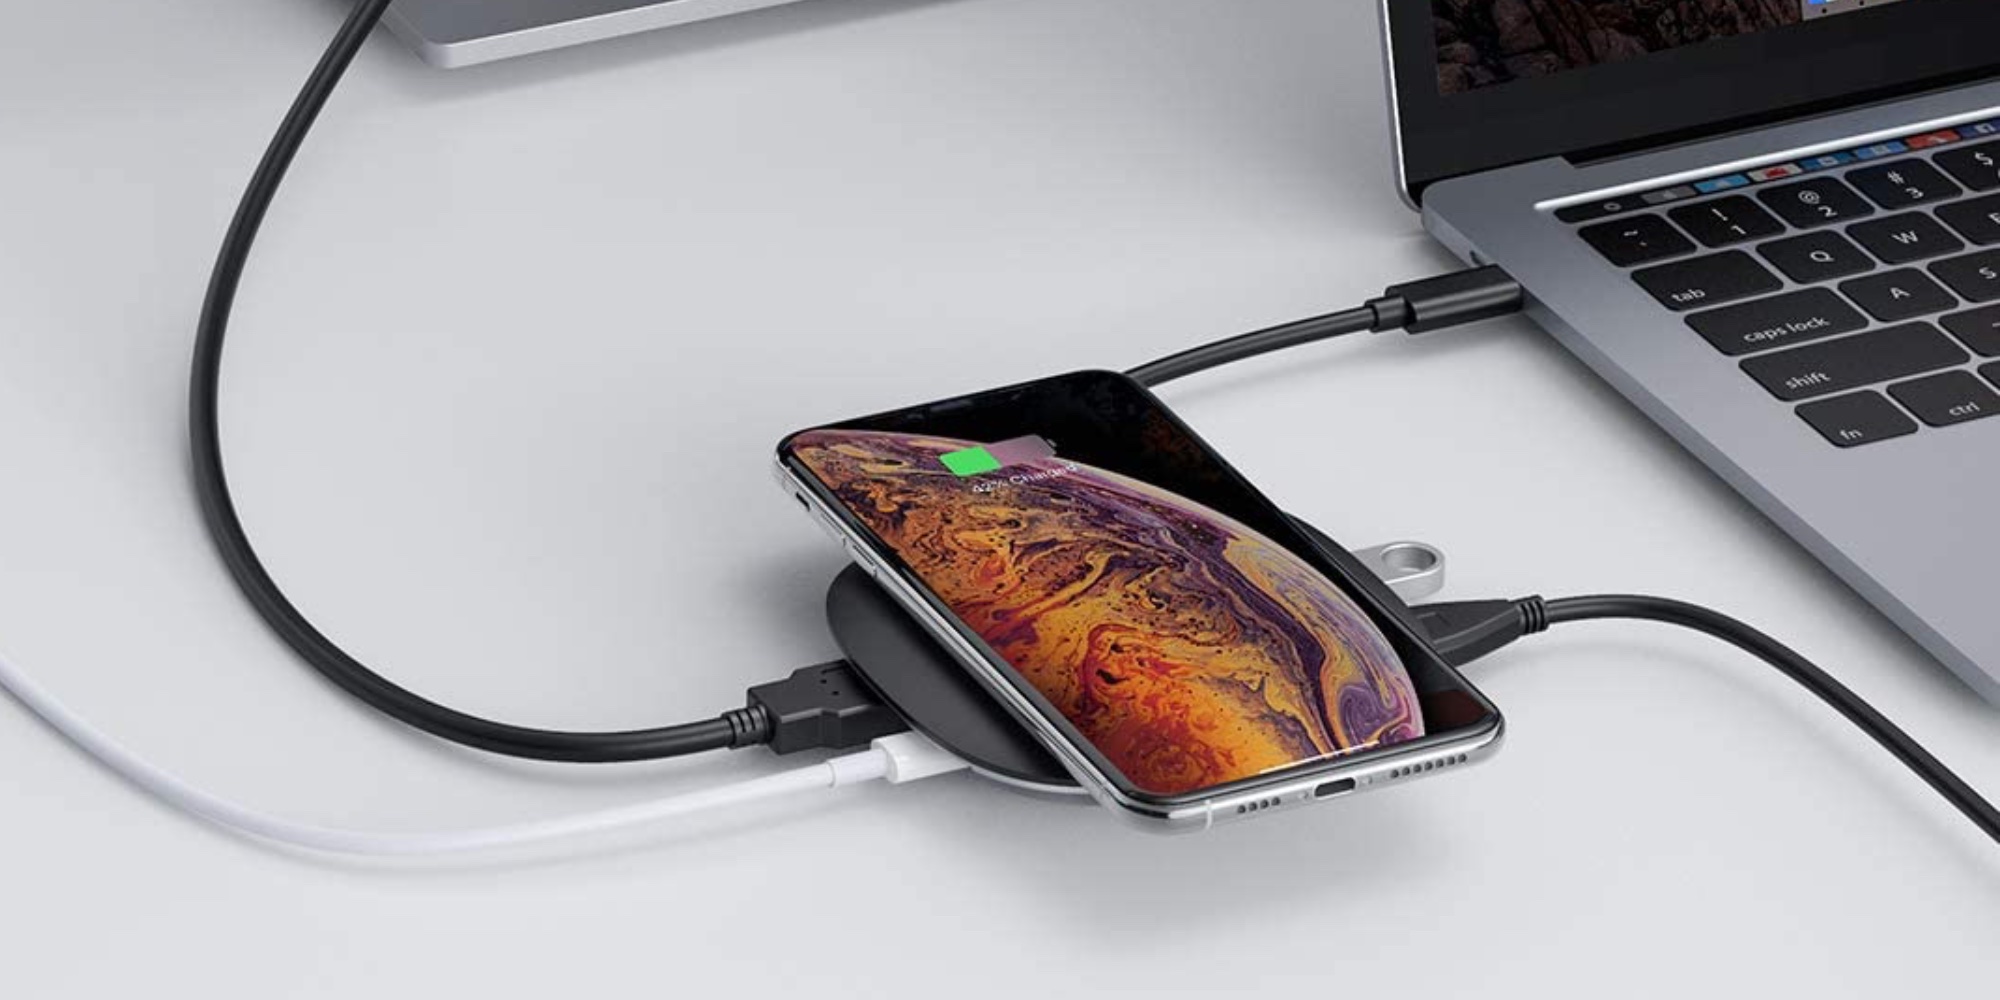 Aukey's 5-in-1 USB-C Hub packs a 5W Qi charging pad, more at $25 (Save 50%)